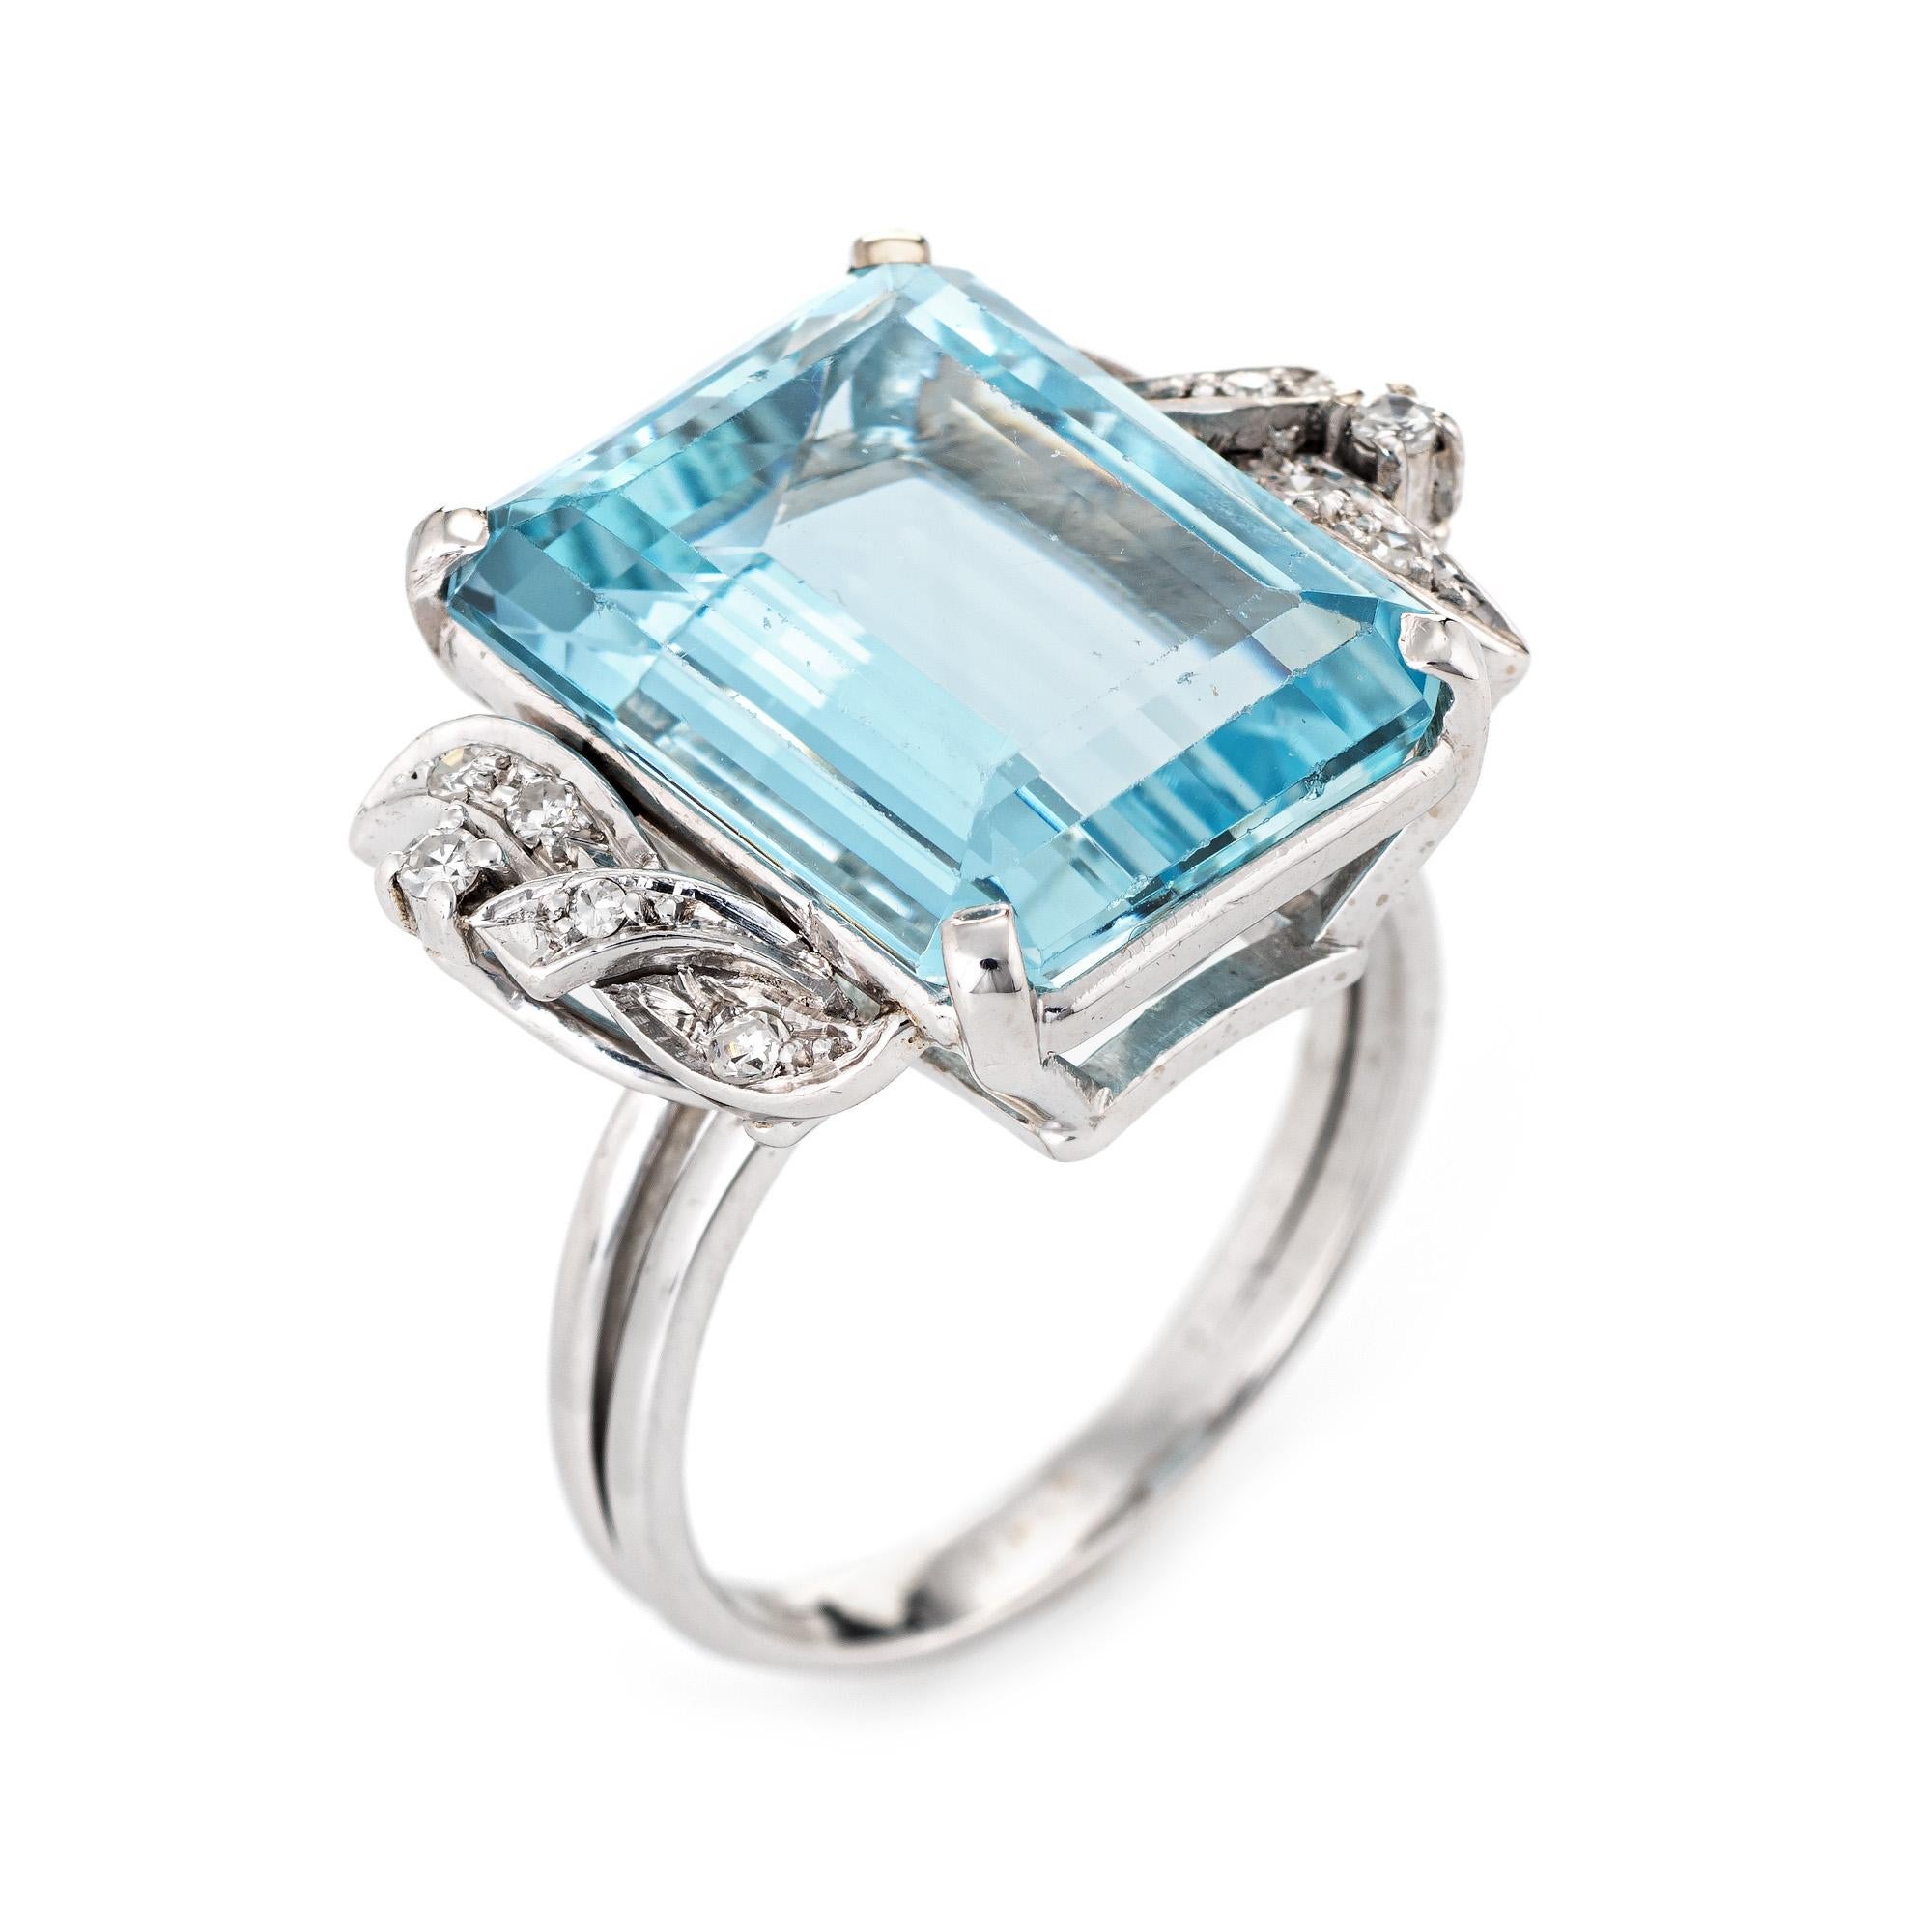 Stylish vintage aquamarine & diamond cocktail ring (circa 1950s to 1960s) crafted in 18 karat yellow gold with platinum accents. 

Emerald cut aquamarine measures 16mm x 12.5mm (estimated at 12 carats), accented with 0.11 carats of diamonds. The